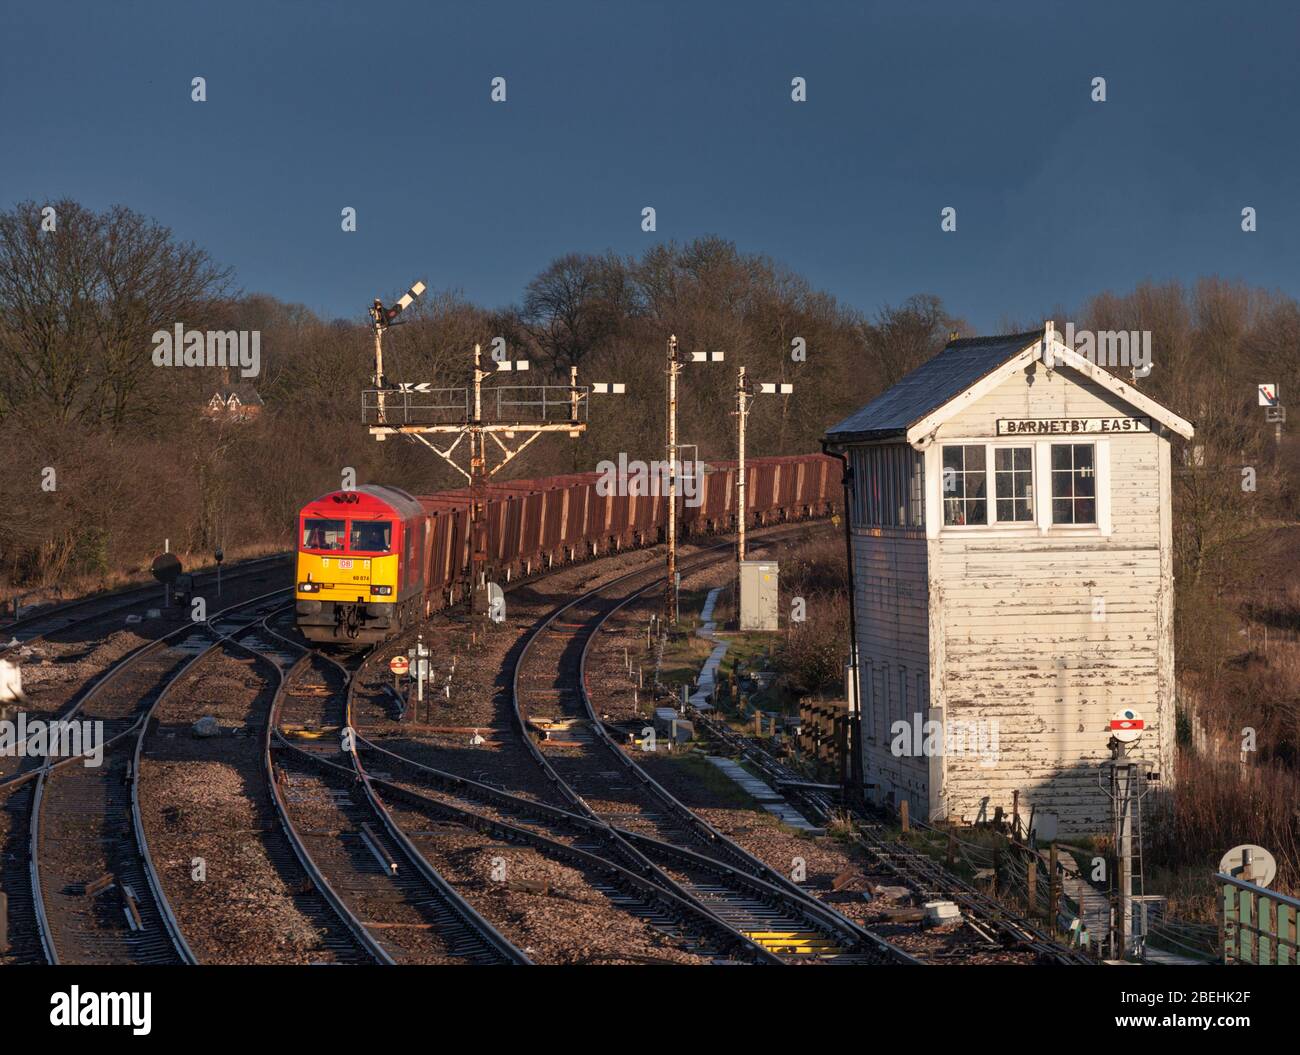 DB cargo Rail UK class 60 locomotives passing the semaphore bracket railway signals and mechanical signal box at Barnetby east with a freight train Stock Photo